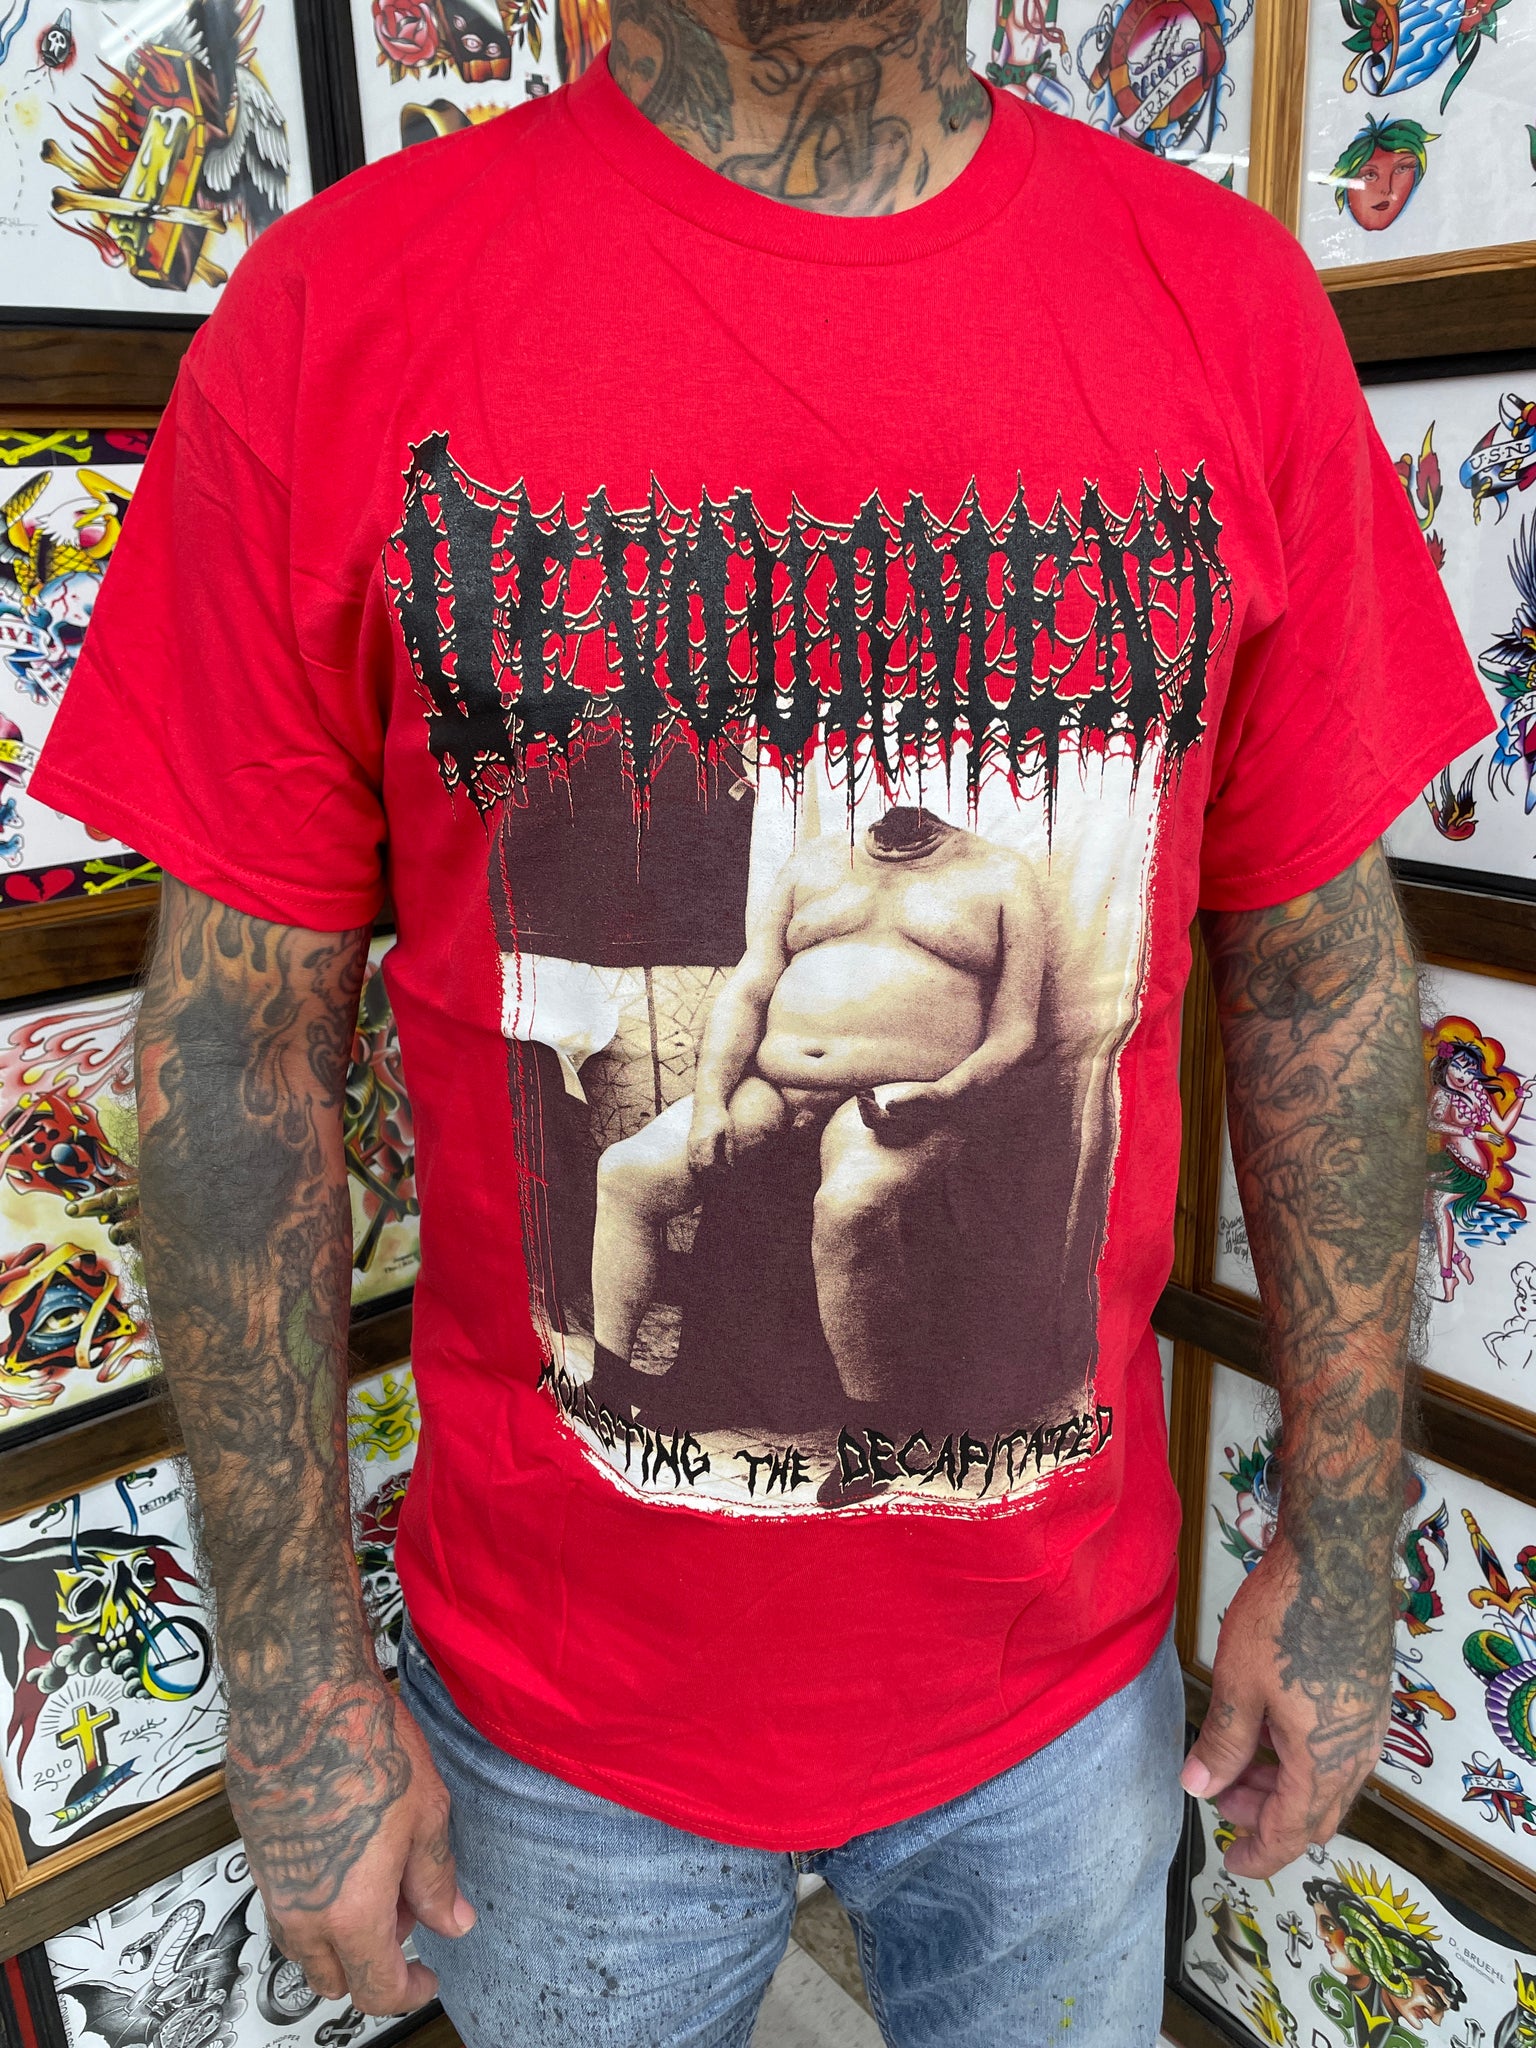 DEVOURMENT - Molesting the Decapitated - red short sleeve